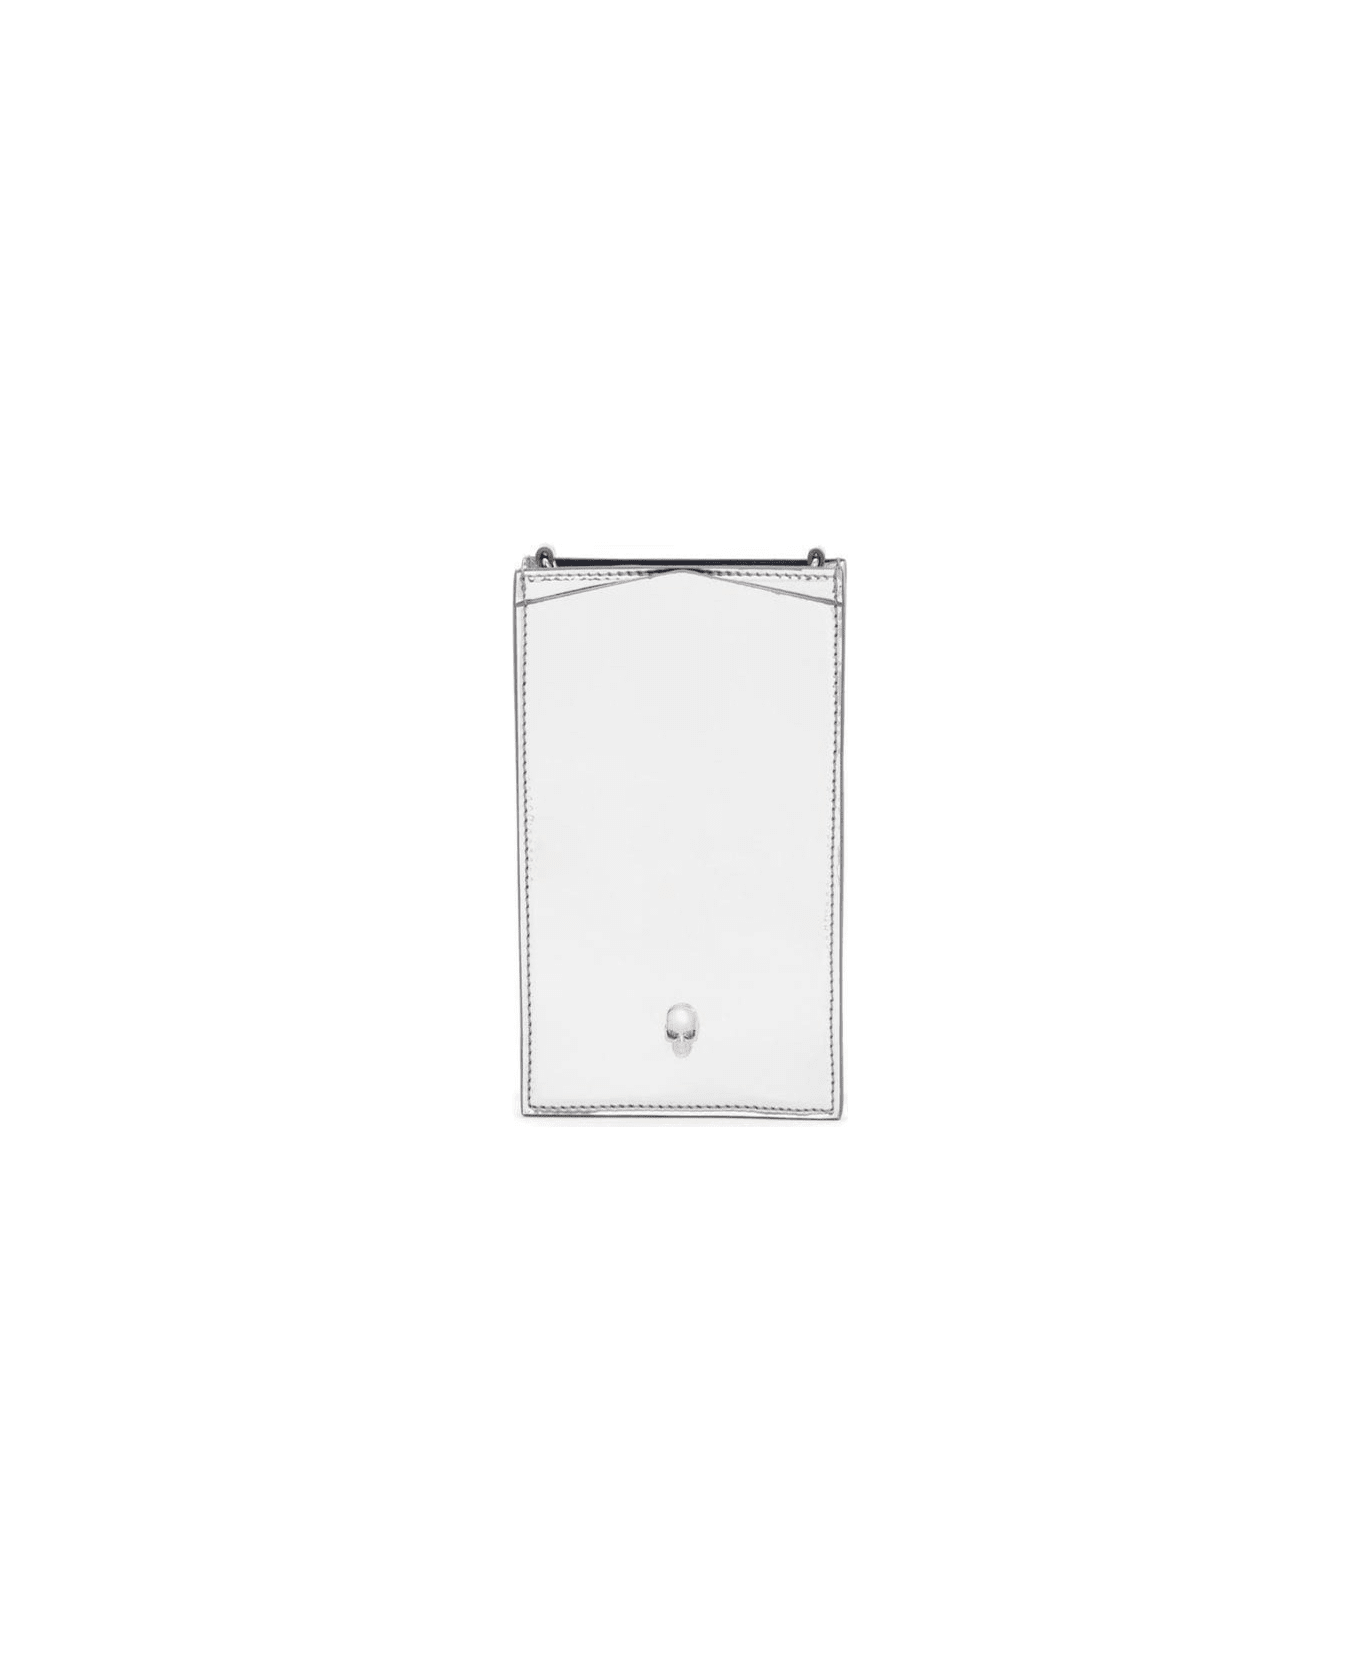 Alexander McQueen Silver-colored Phoce Case With Chain And Skull Detail In Laminated Faux Leather Woman - Metallic